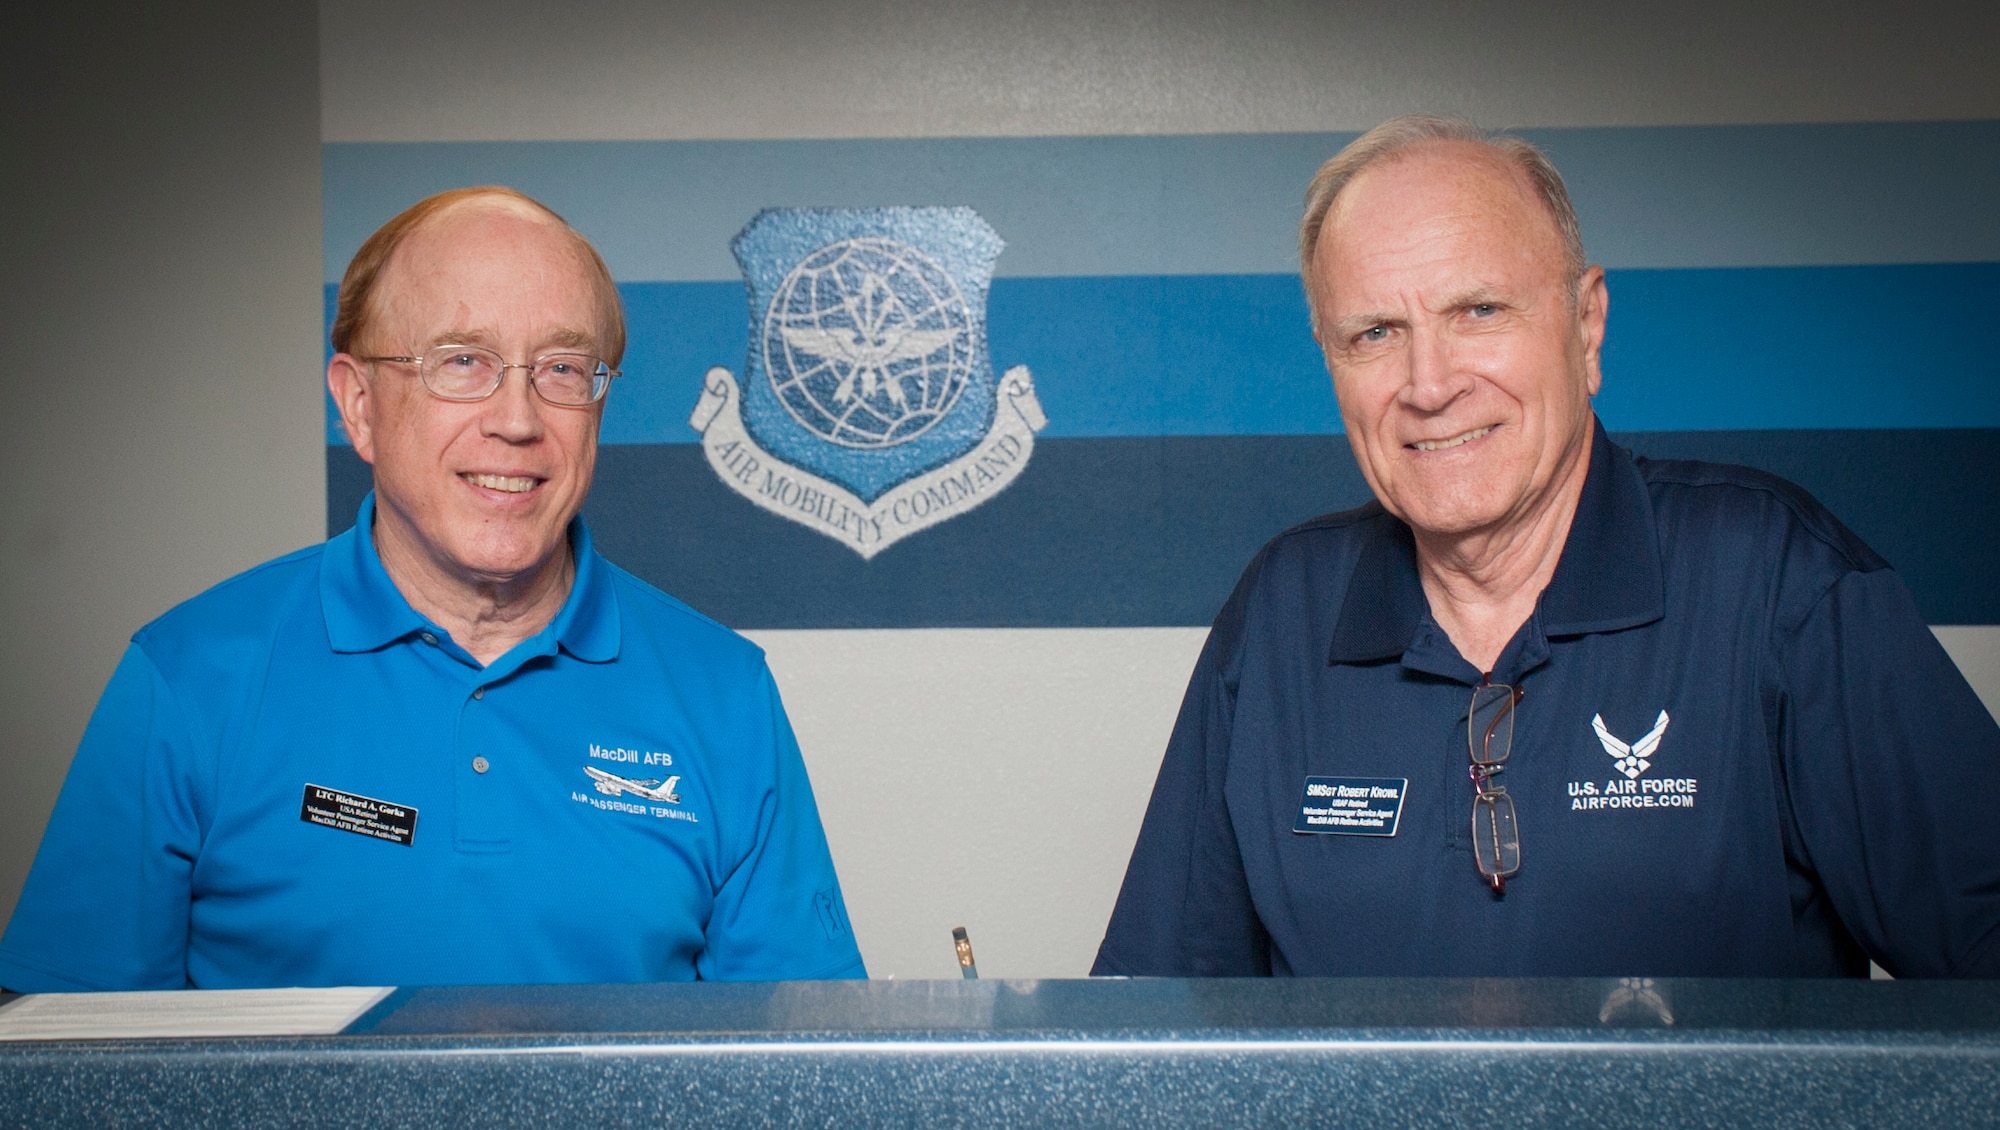 Retired U.S. Army Lt. Col Richard Gorka, left, and retired U.S. Air Force Senior Master Sgt. Robert Krowl, right, both volunteers at the passenger terminal, pause for a photo at the passenger terminal at MacDill Air Force Base, Fla., June 21, 2017. The passenger terminal has 16 volunteer veterans who assist with customer service. (U.S. Air Force photo by Airman 1st Class Mariette Adams)